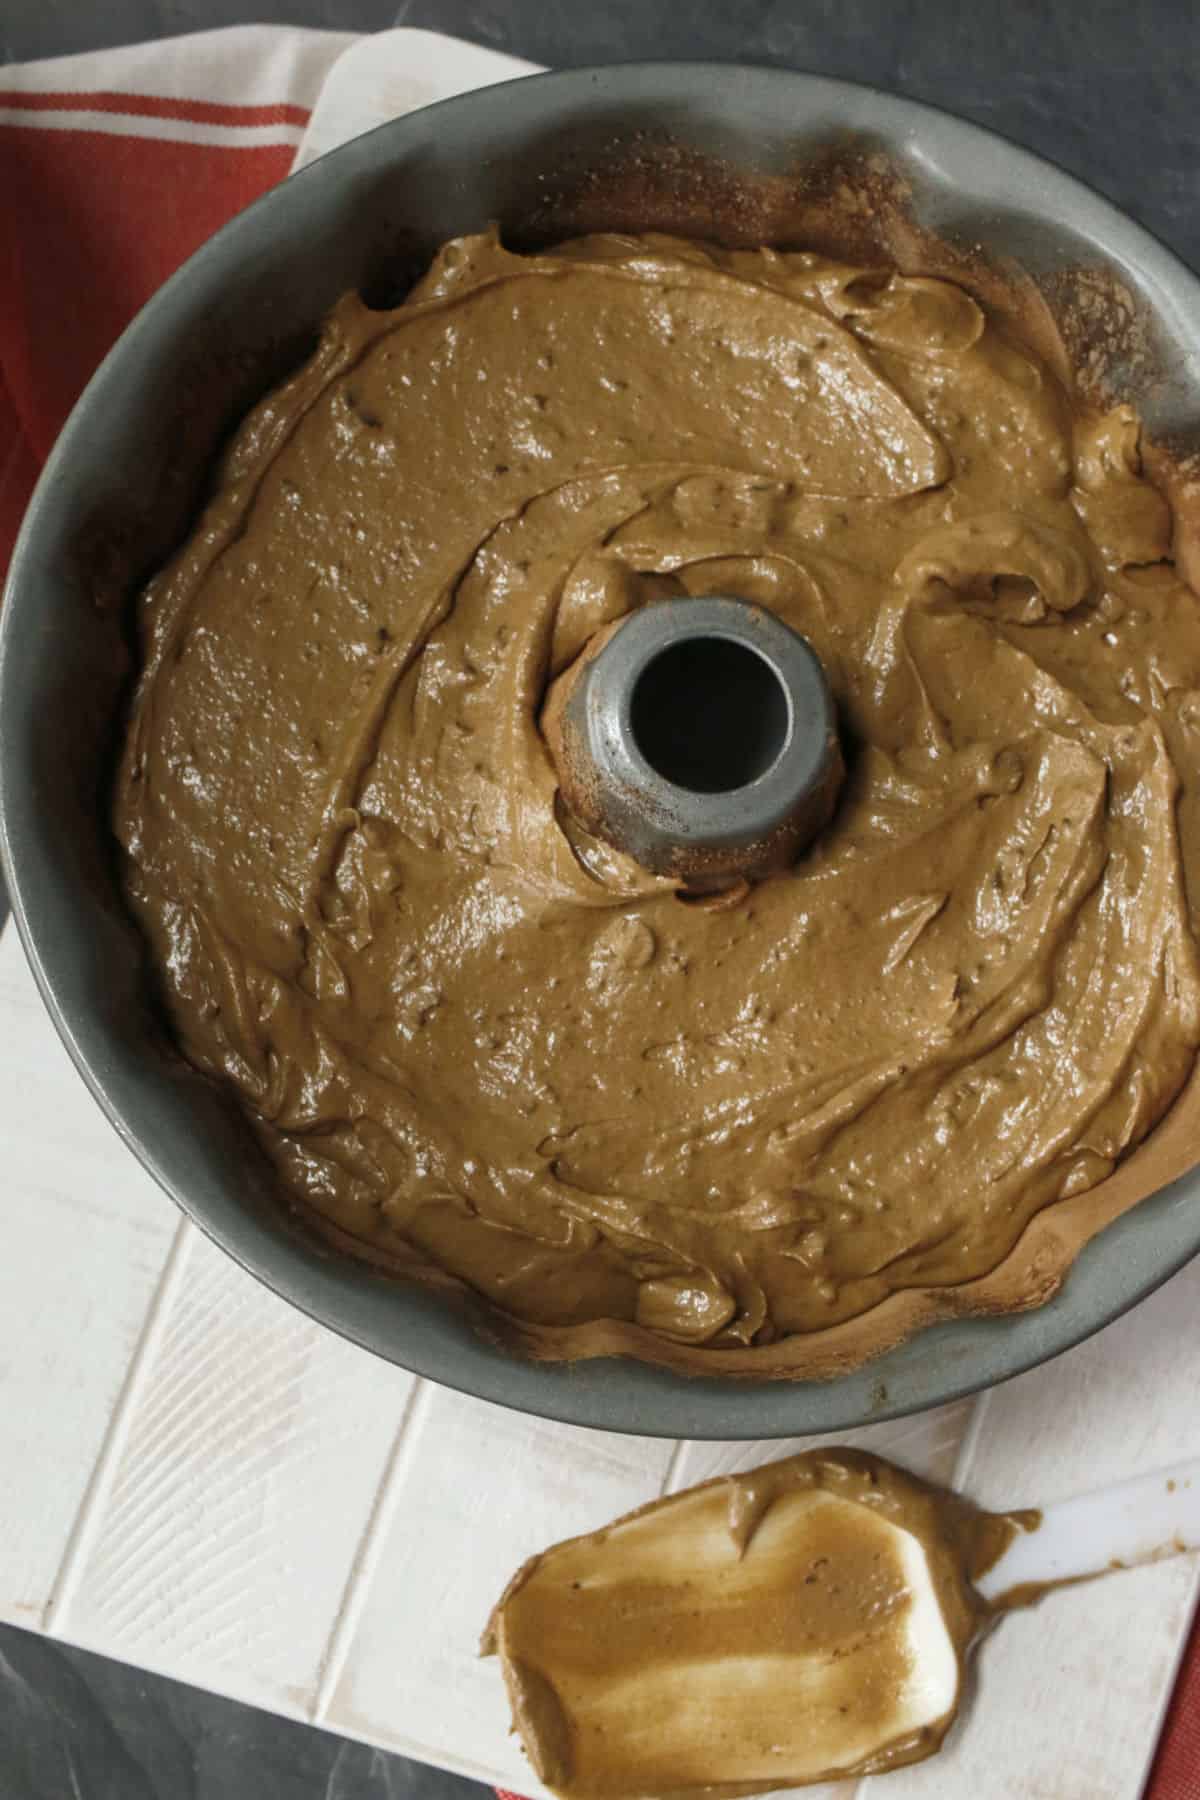 Chocolate cake batter in a silver bundt pan.